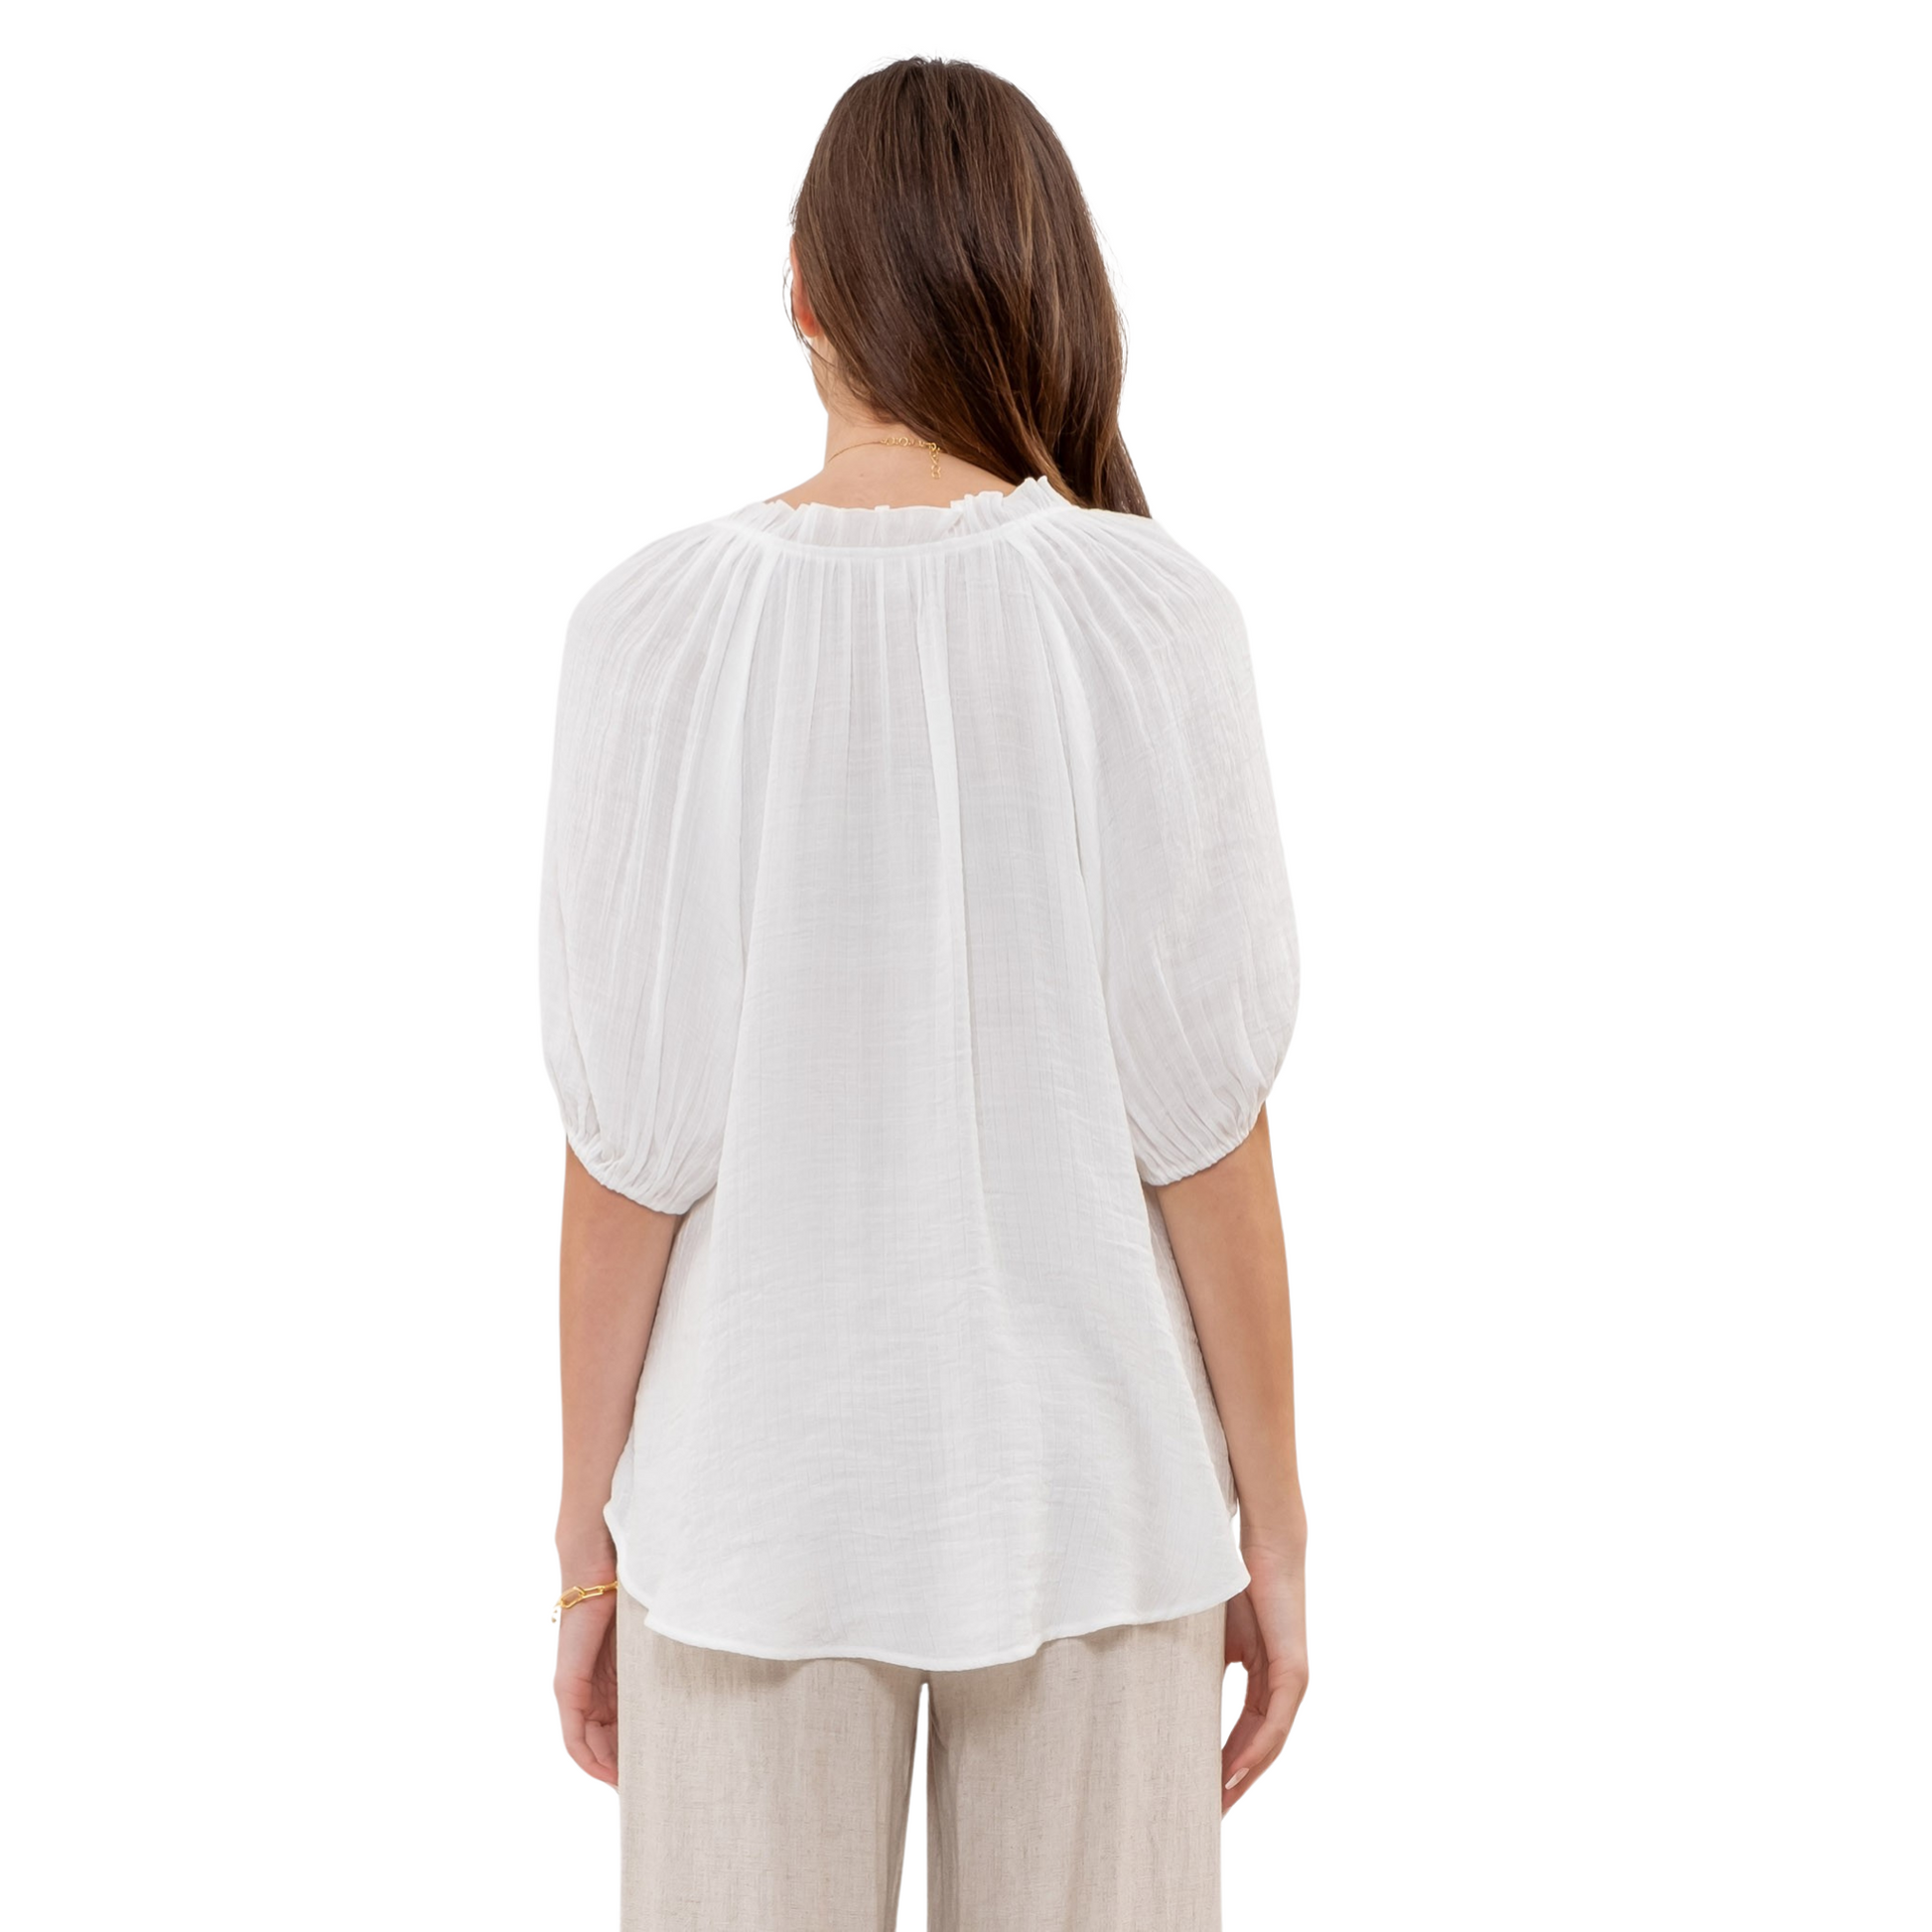 "This V-neck top features a lightweight and comfortable design, perfect for all-day wear. The flattering v-neck style is accentuated by a ruffled collar, giving this top a touch of elegance. Available in classic white, this top is a versatile addition to any wardrobe."